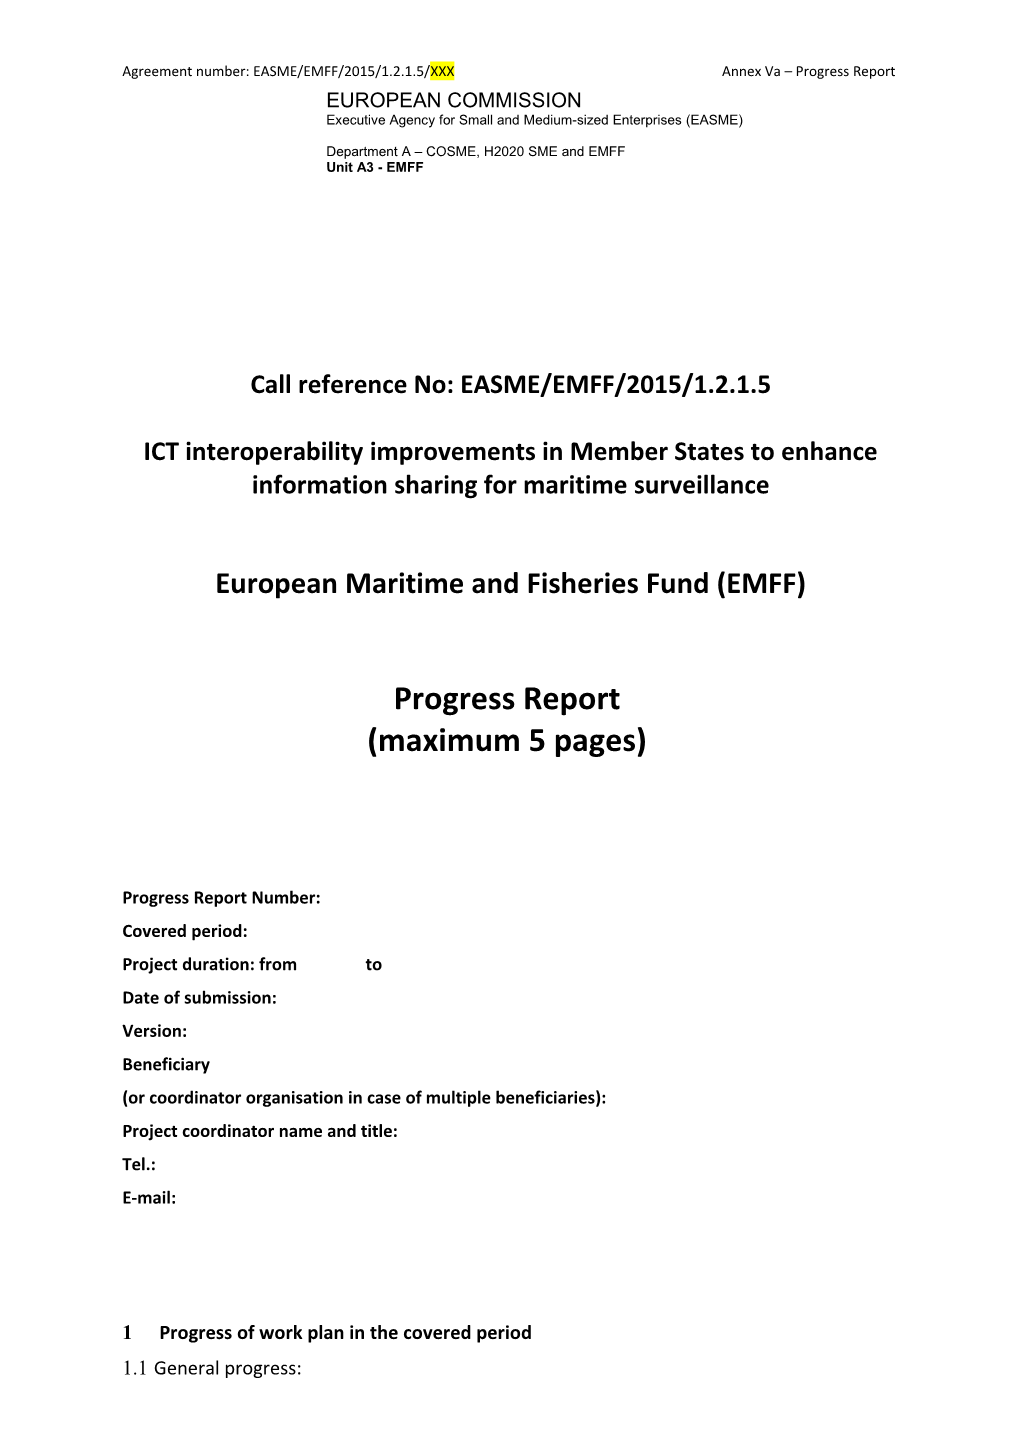 Call Reference No: EASME/EMFF/2015/1.2.1.5